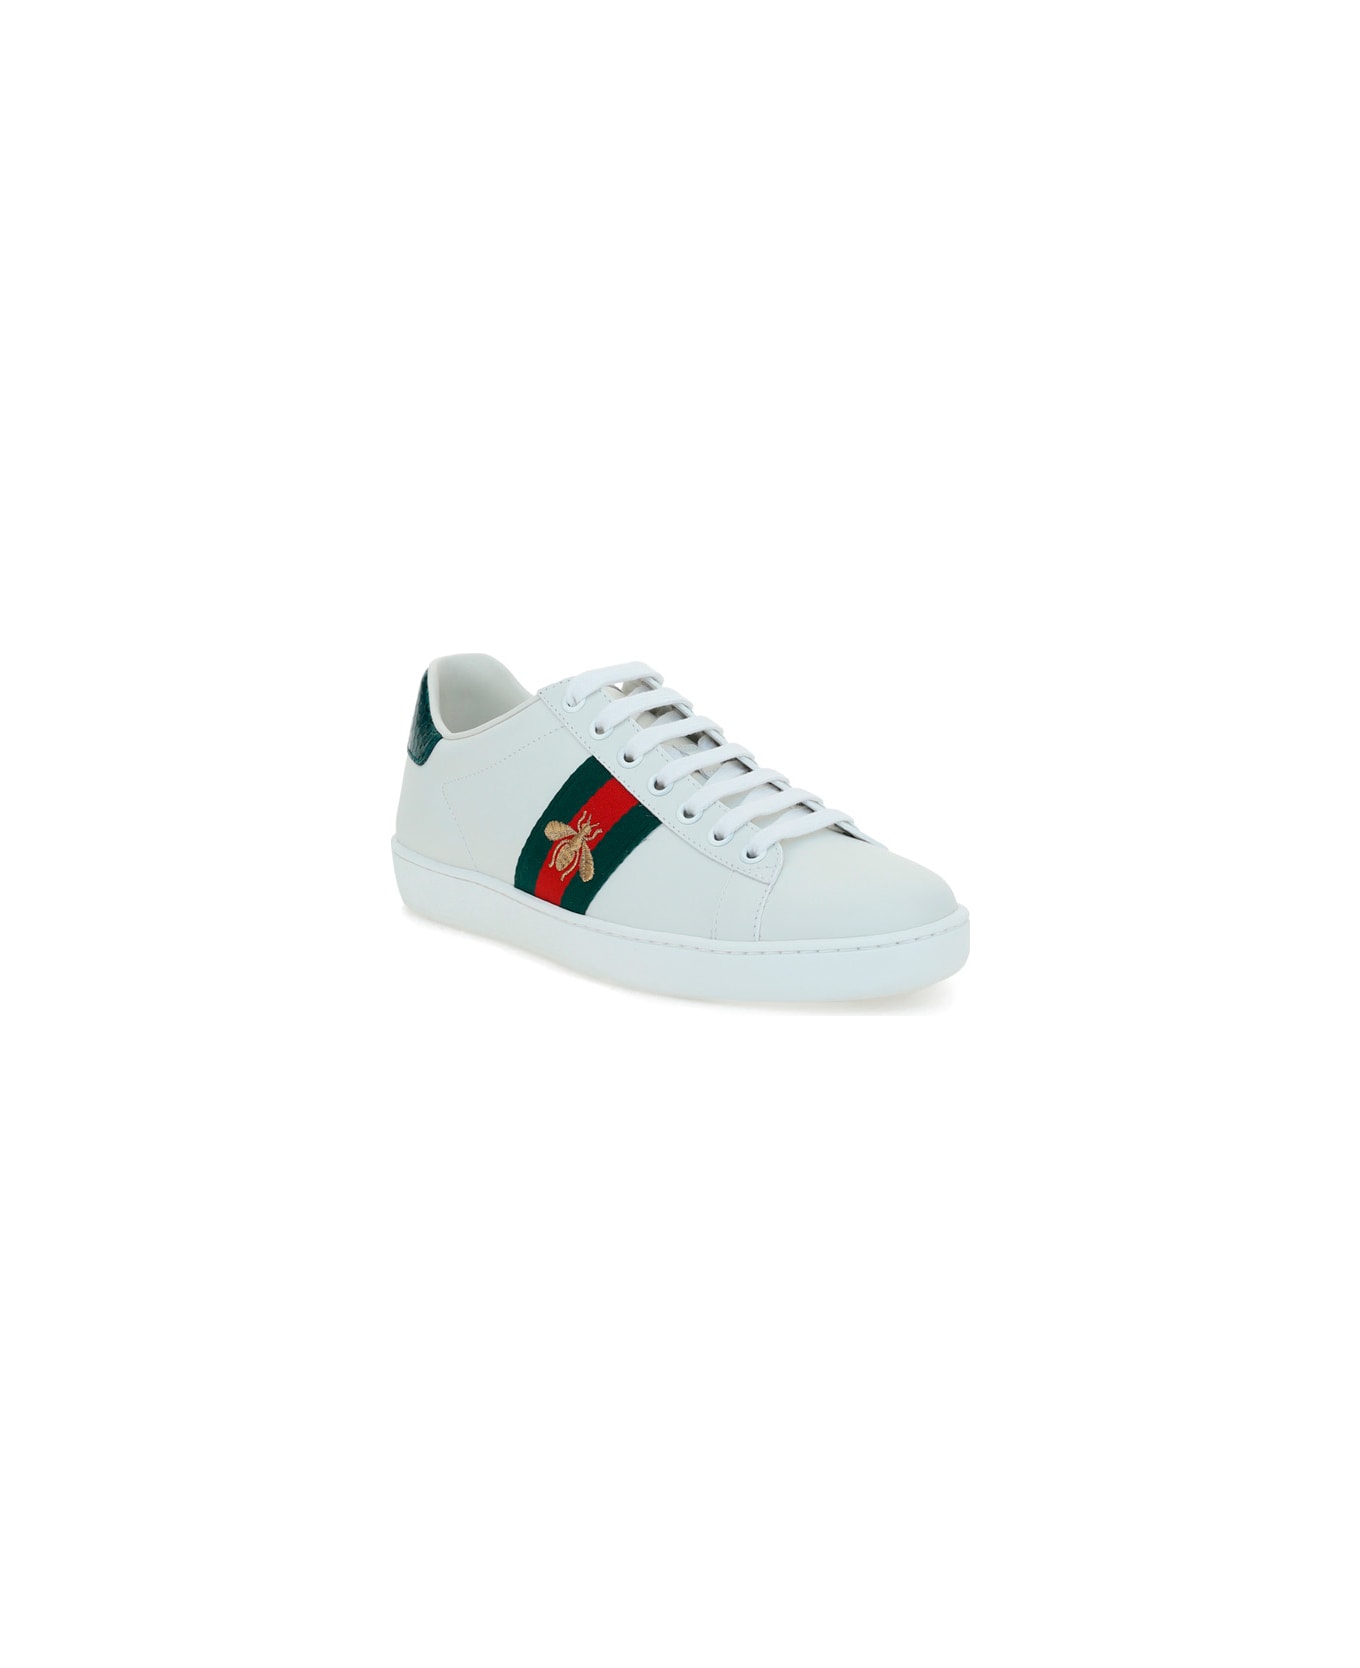 Gucci Sneakers - White スニーカー